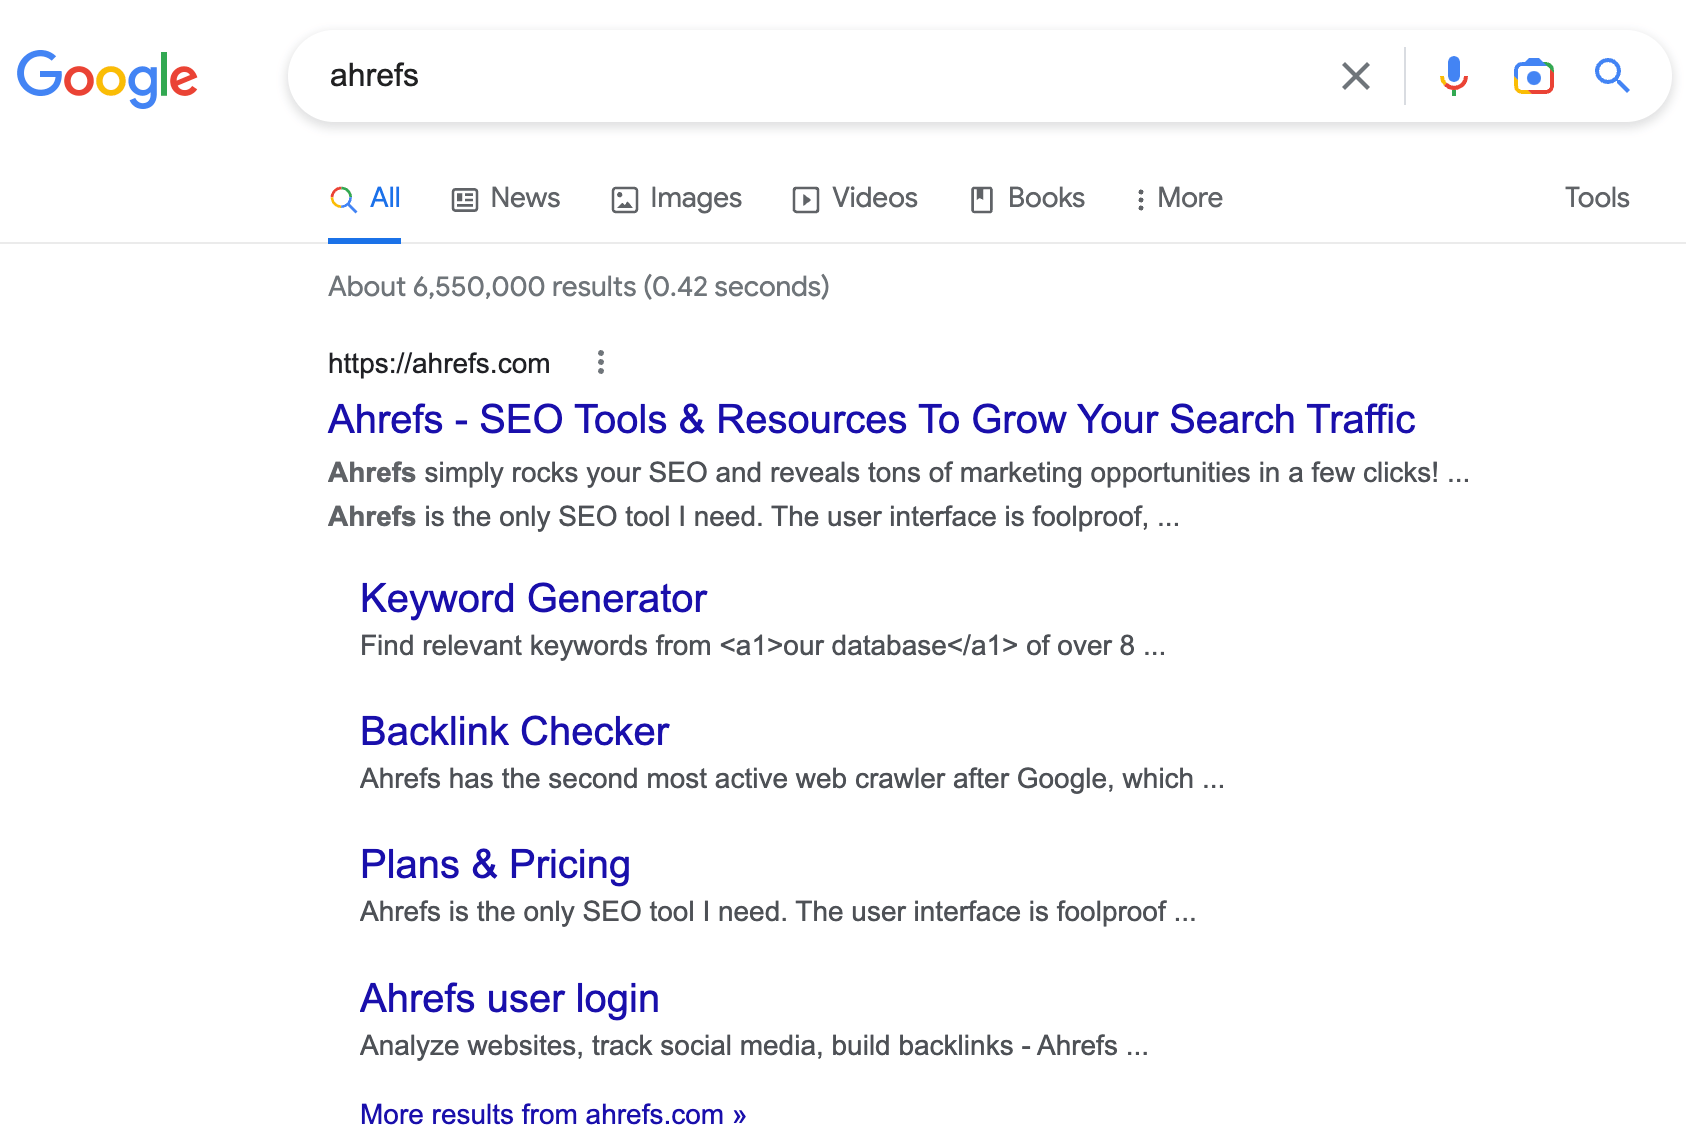 Google search results for keyword "ahrefs"